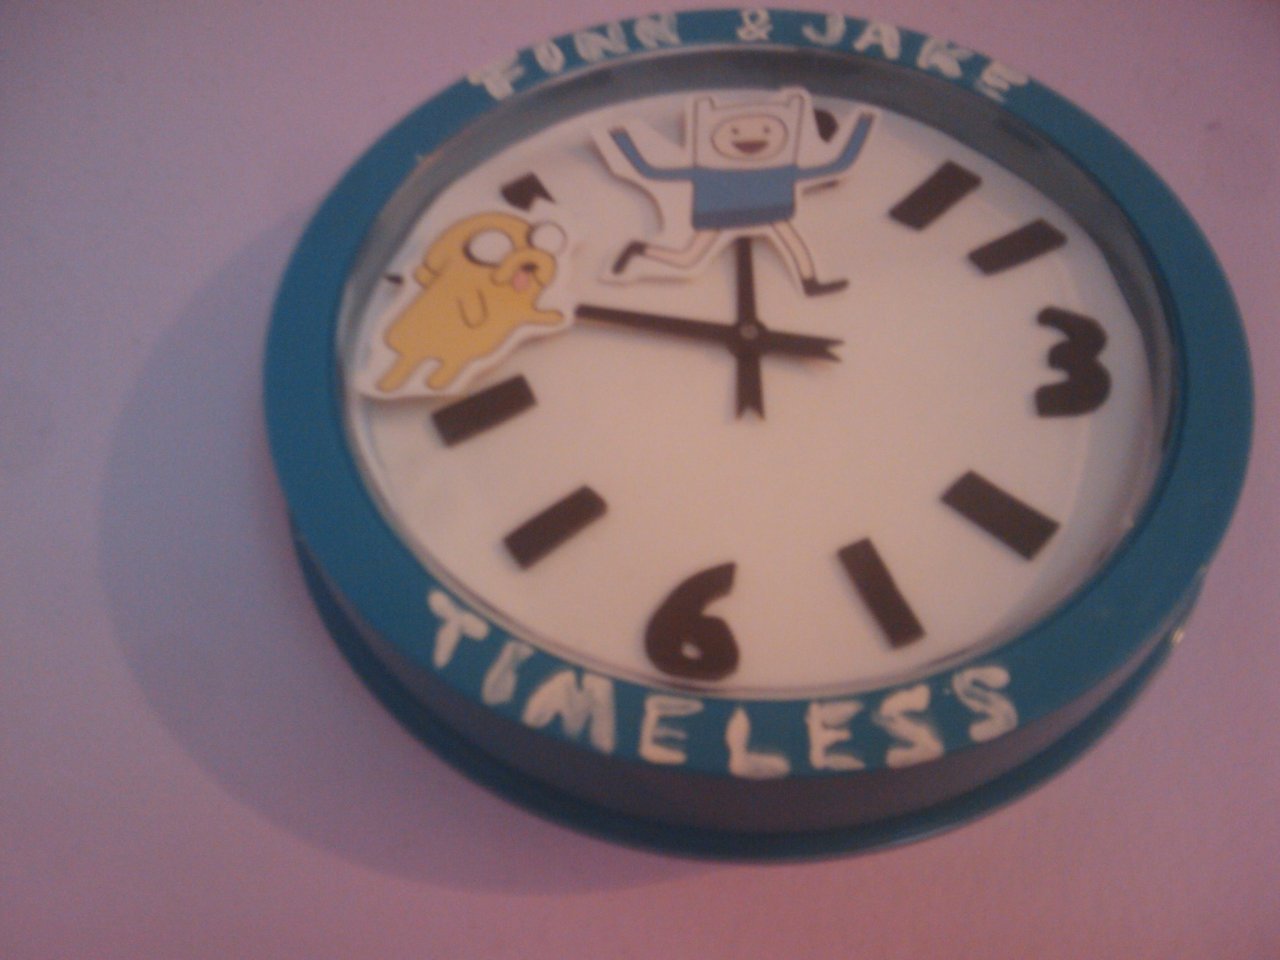 I finally finished that Adventure Time clock I was working on. It took so long mostly